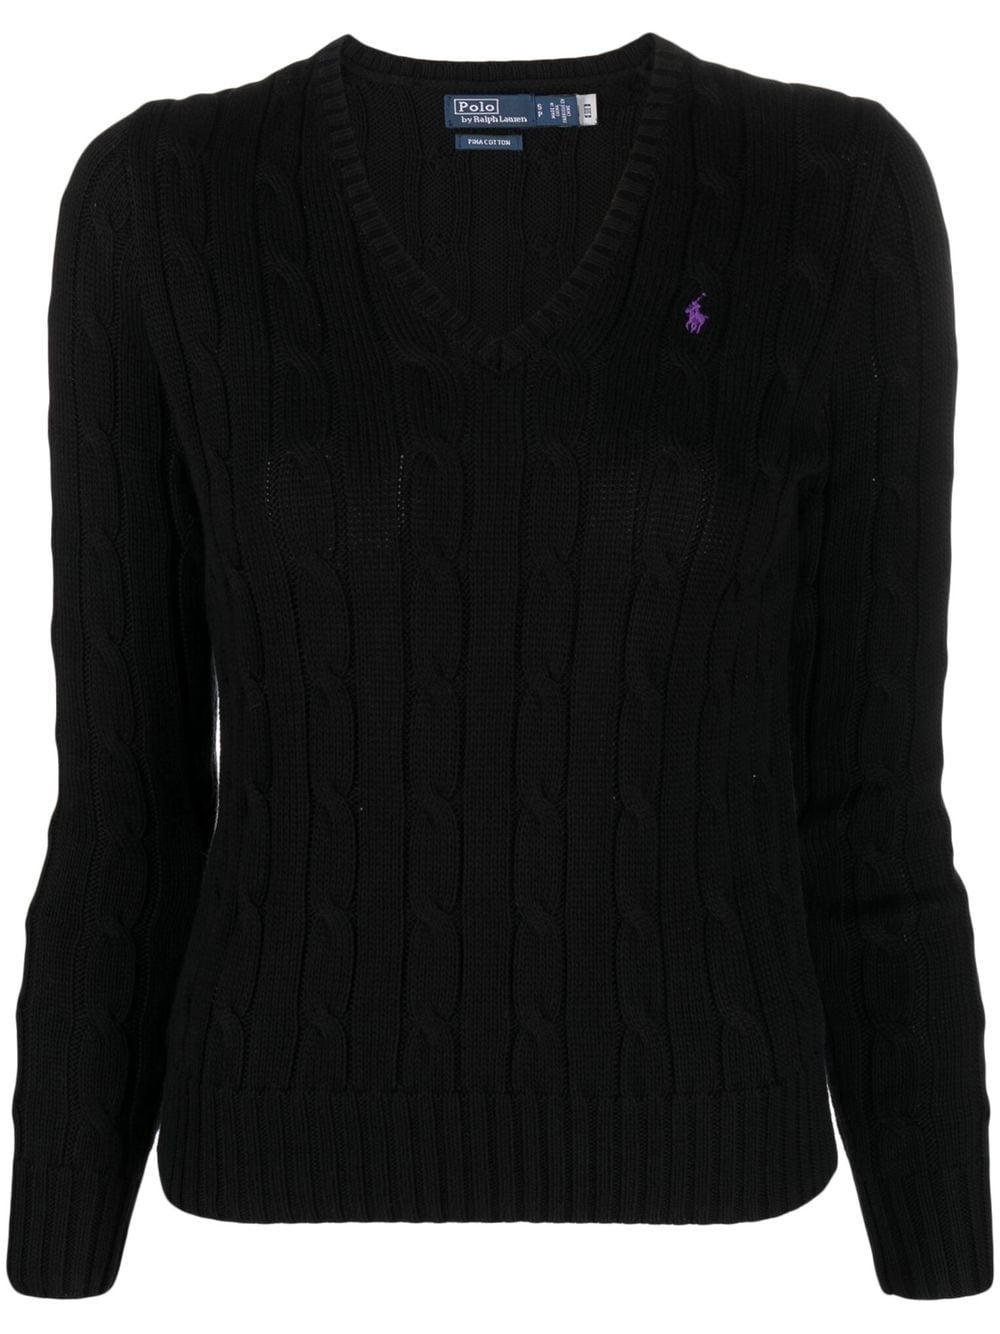 Polo Ralph Lauren Kimberly Polo Pony cable-knit jumper - Black von Polo Ralph Lauren